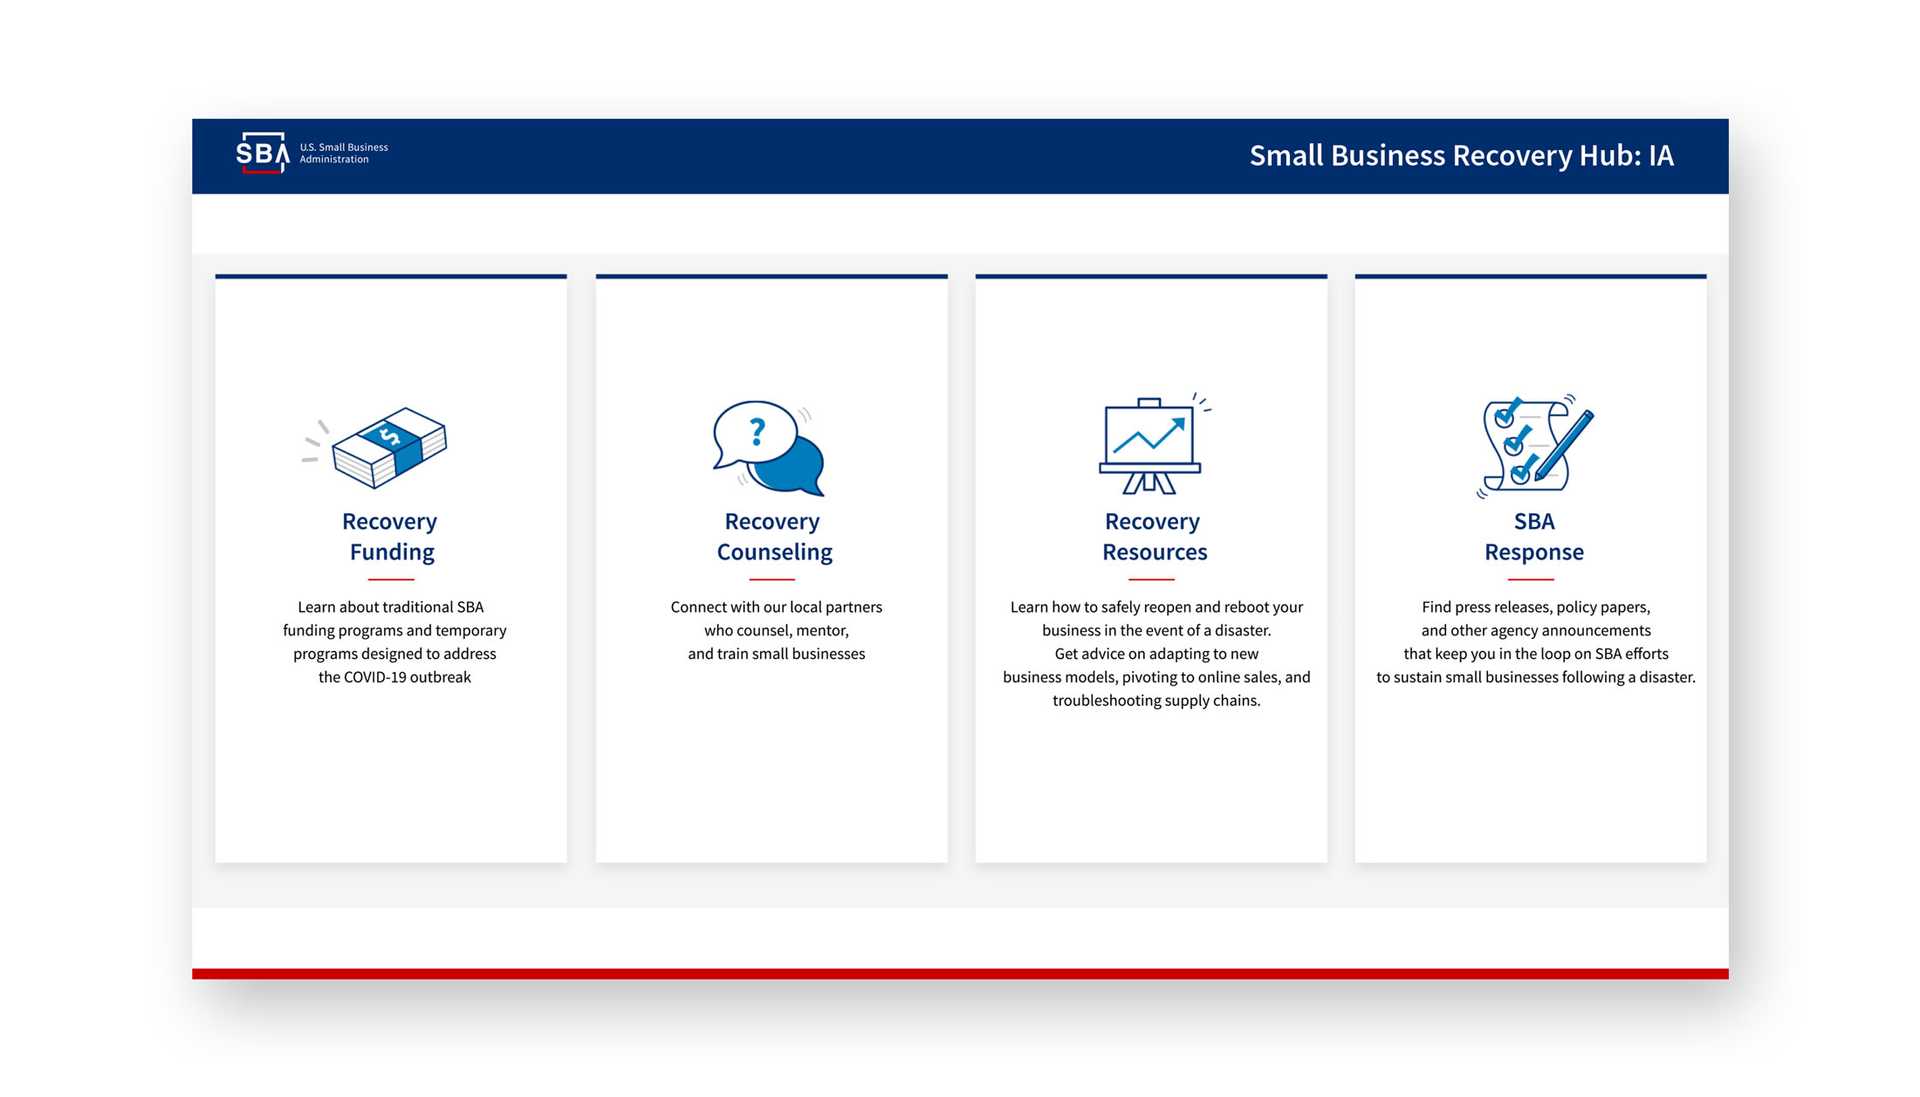 Four cards showing key SBA content areas.